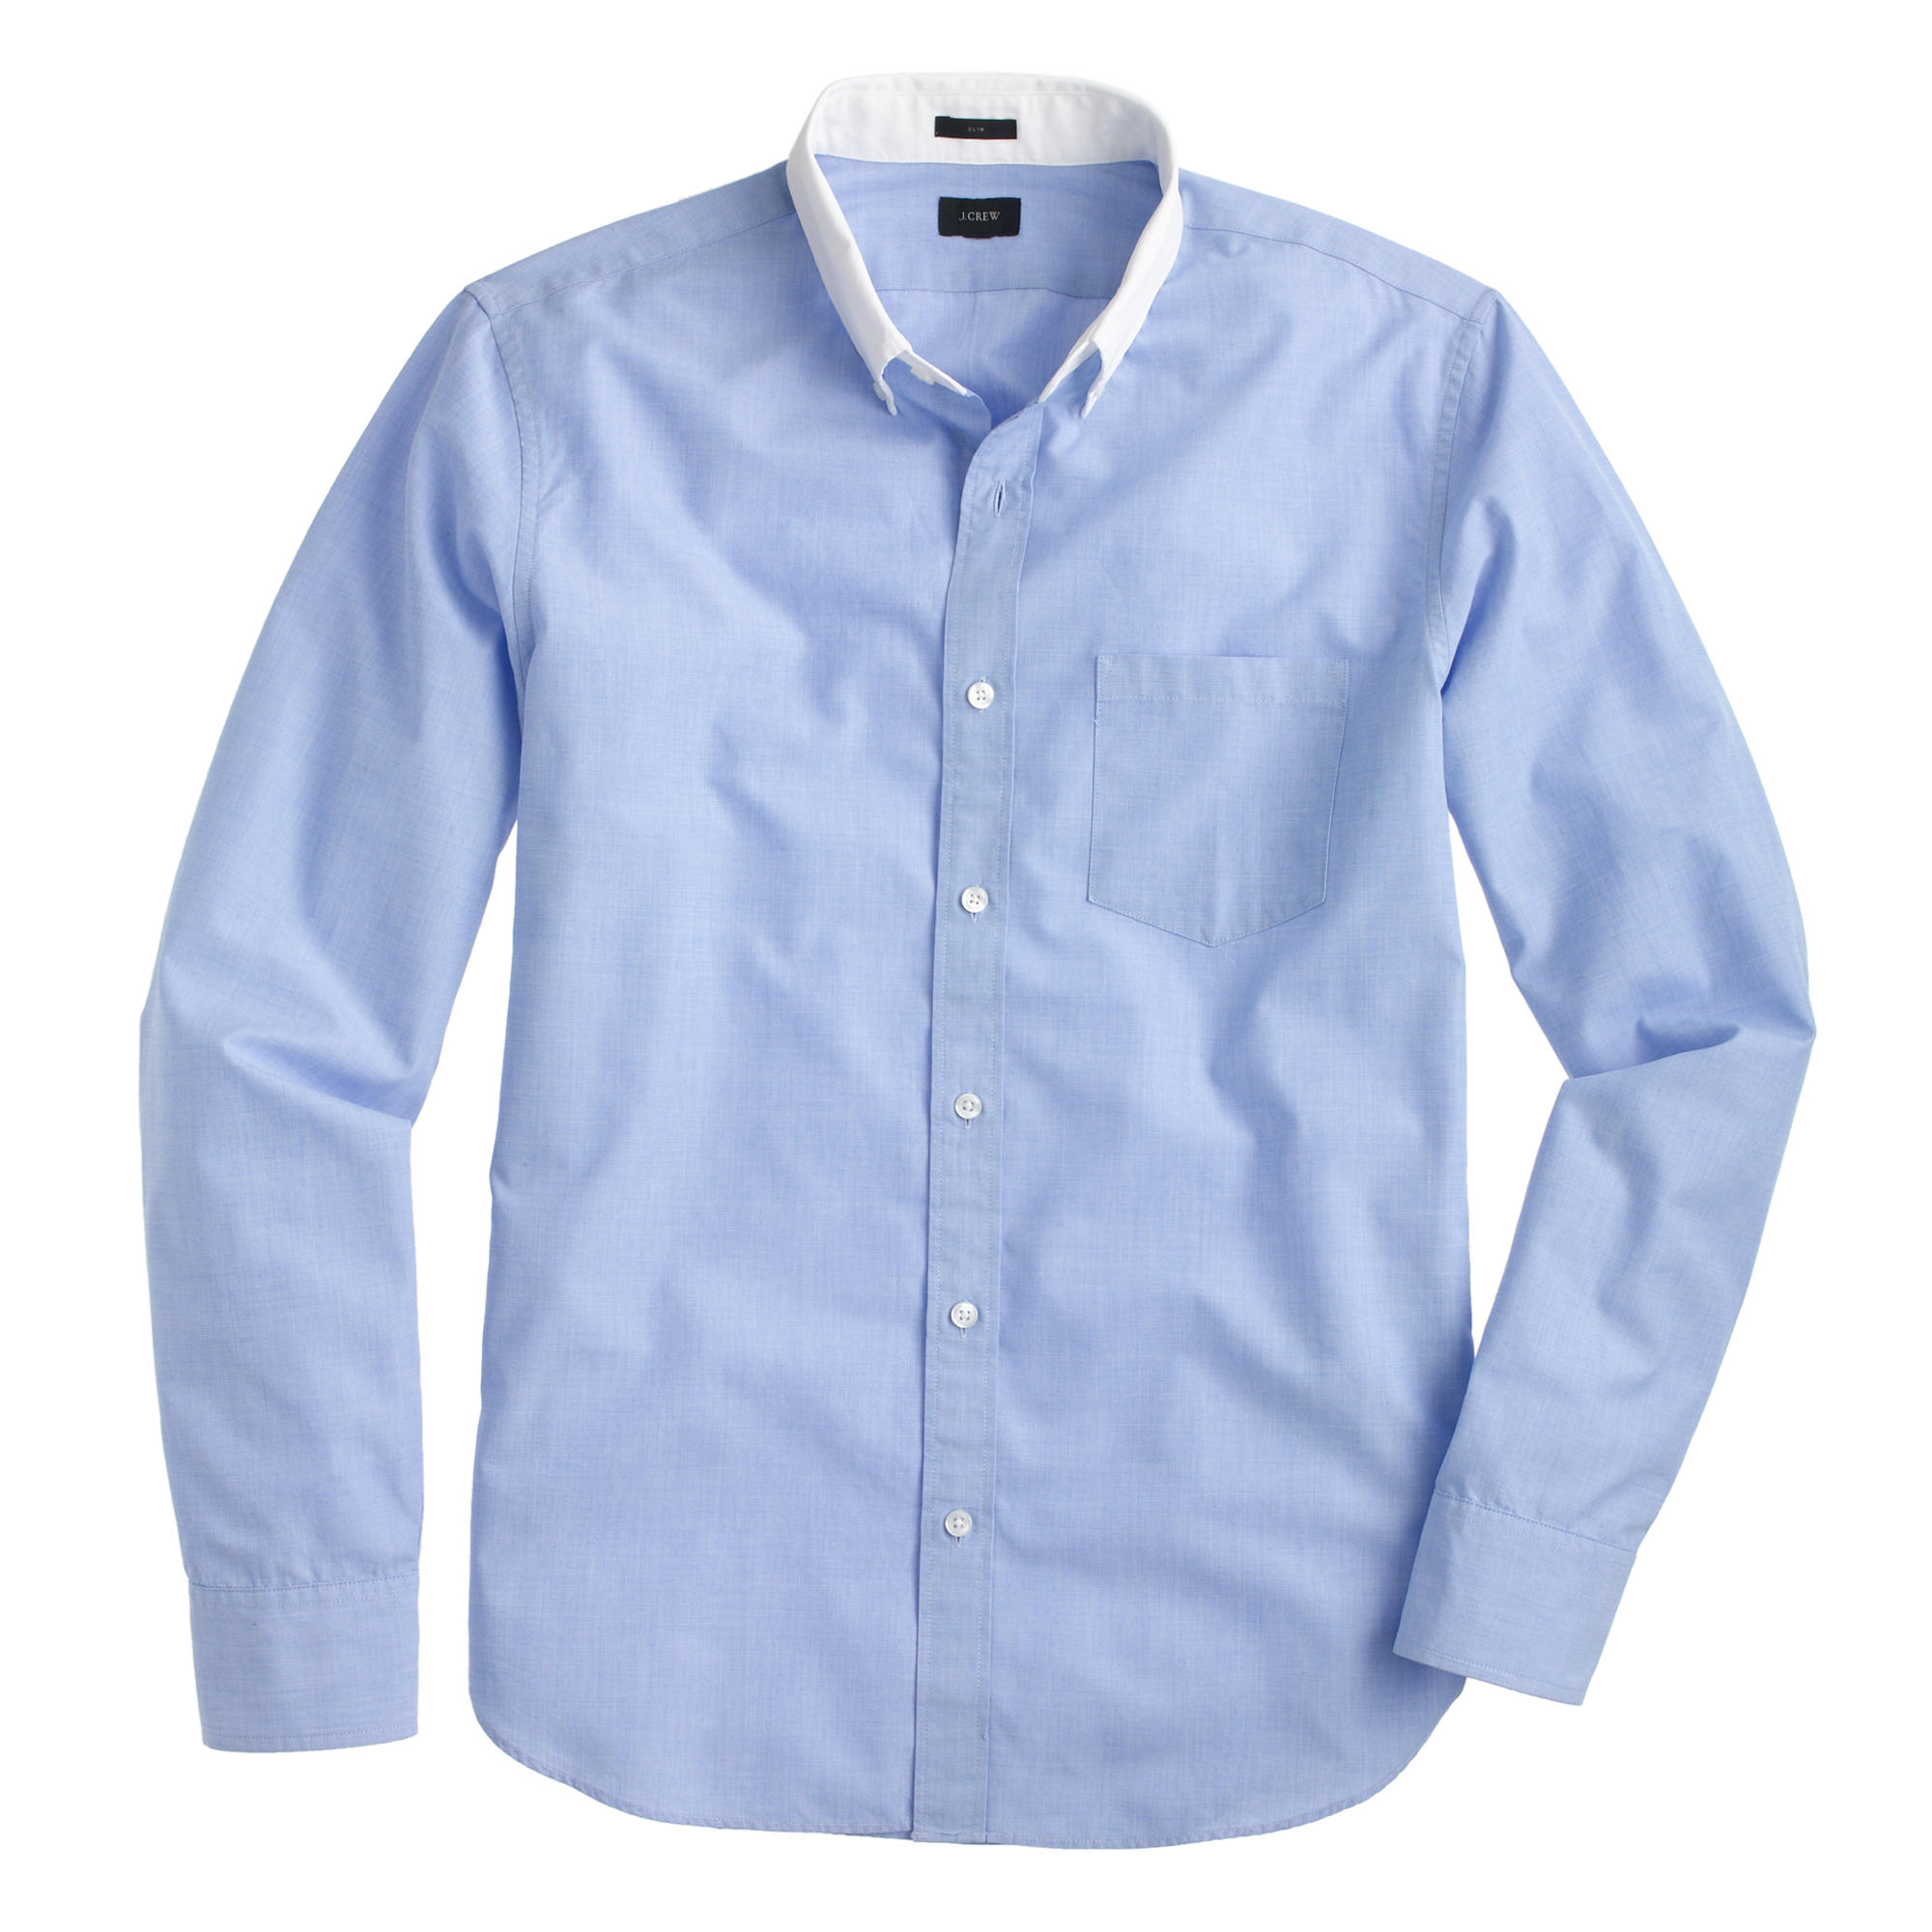 Lyst - J.Crew Secret Wash White-collar Shirt In End-on-end Cotton in ...